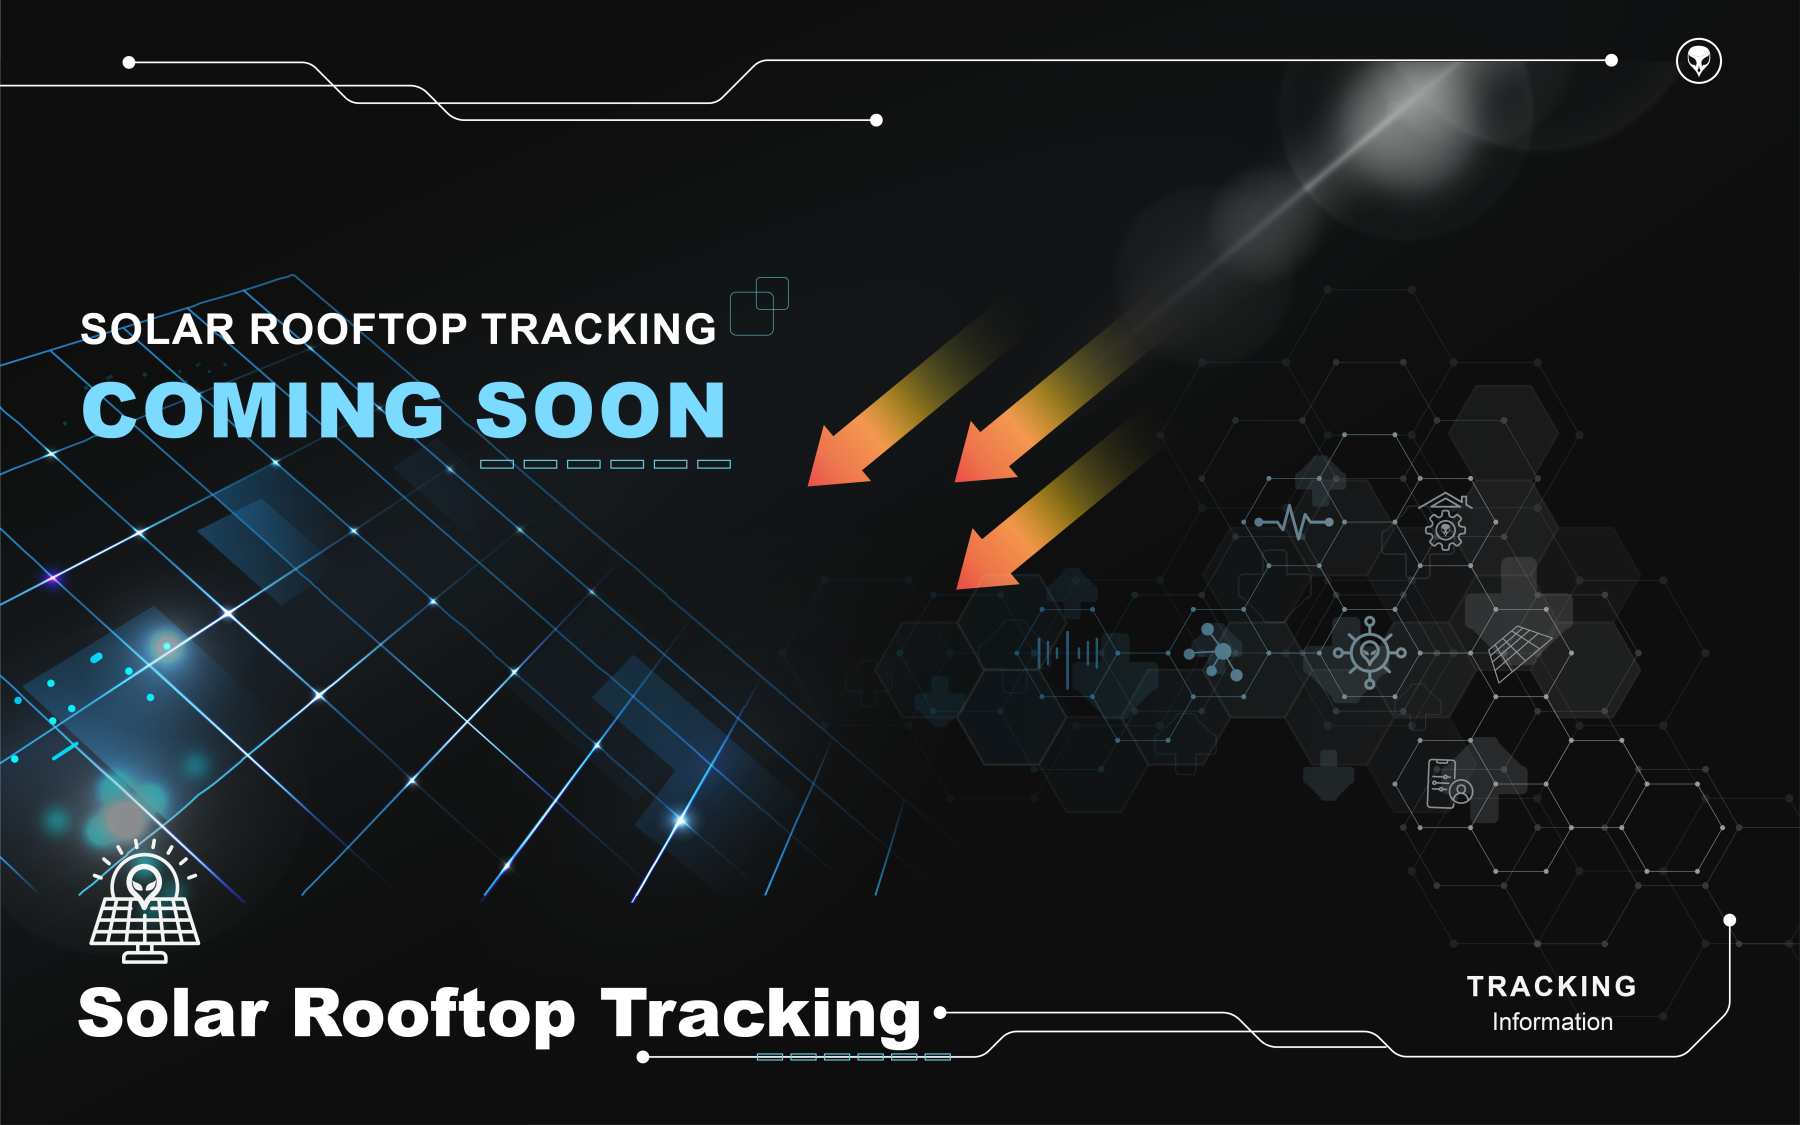 Solar Rooftop Tracking